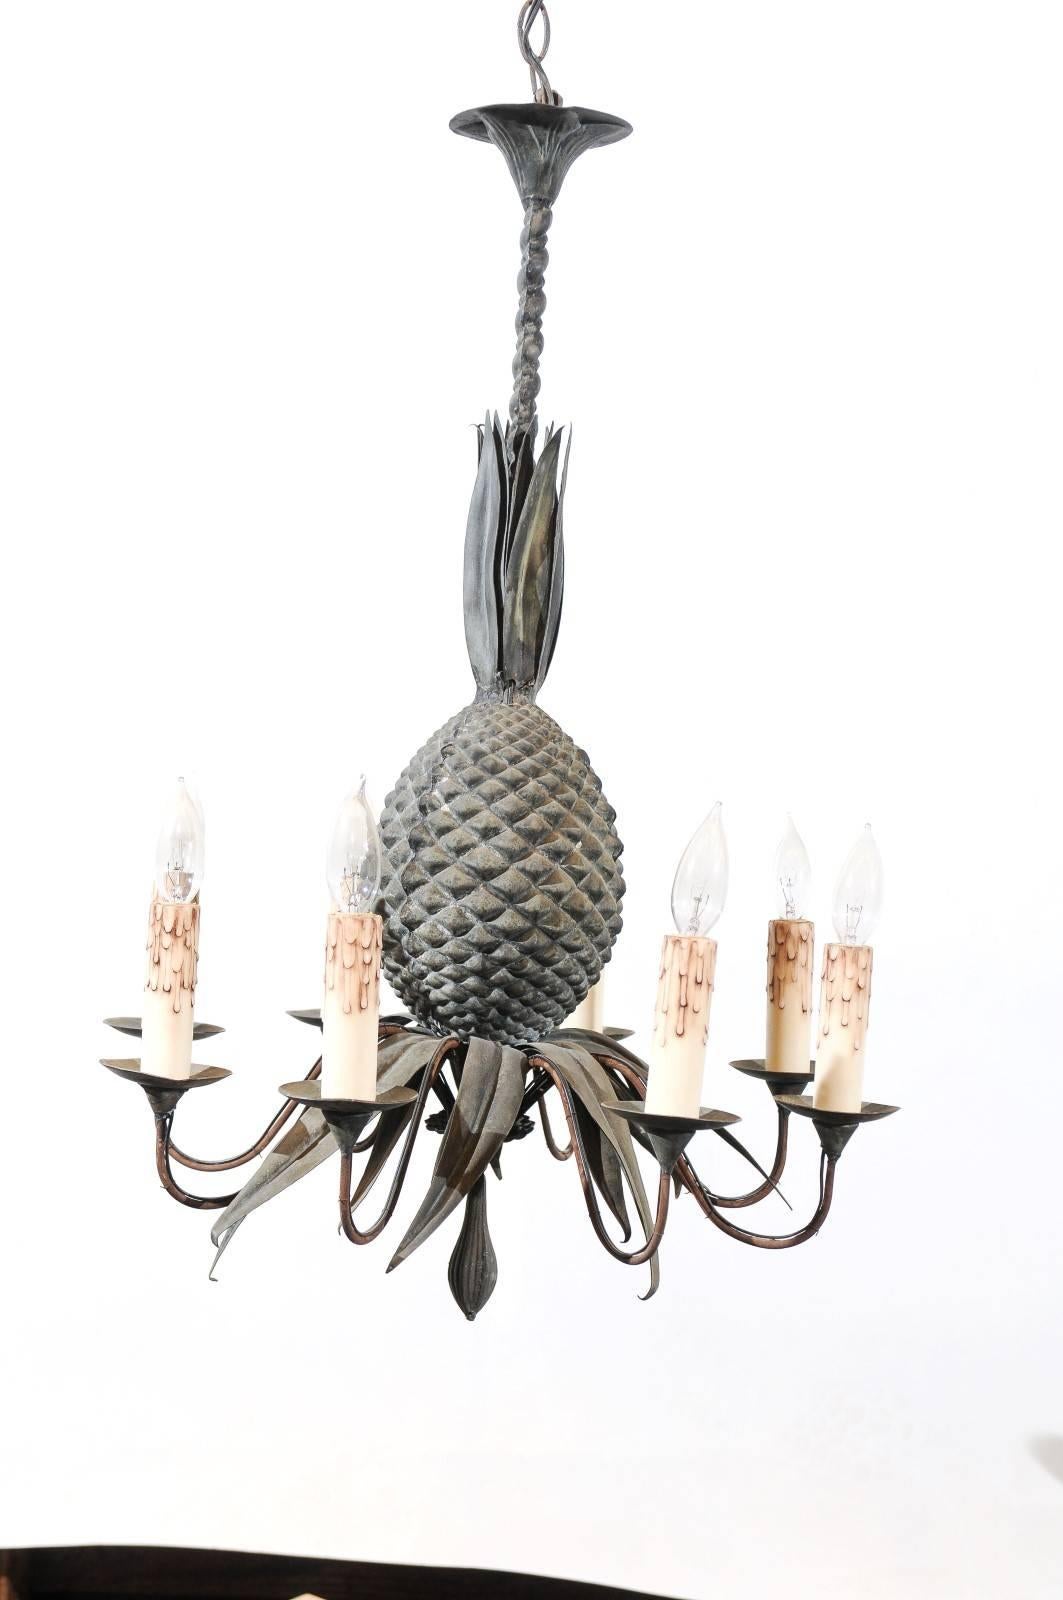 European Iron Pineapple Chandelier with 8 Lights, France ca. 1920